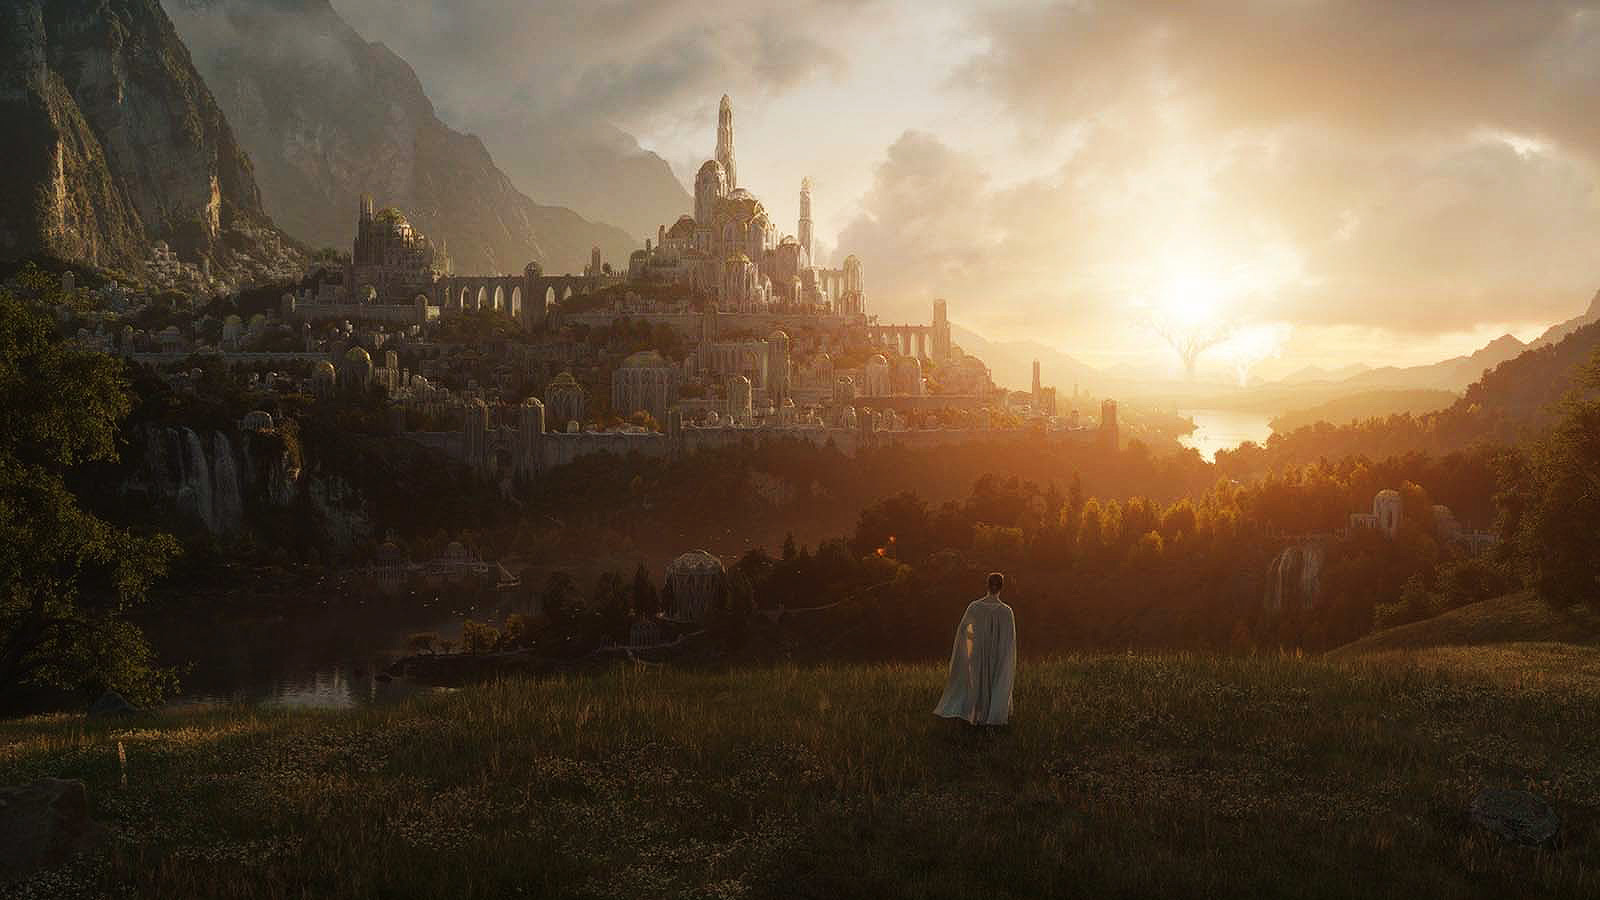 The Lord Of The Rings' Trilogy: A Look Back At A Breathtaking